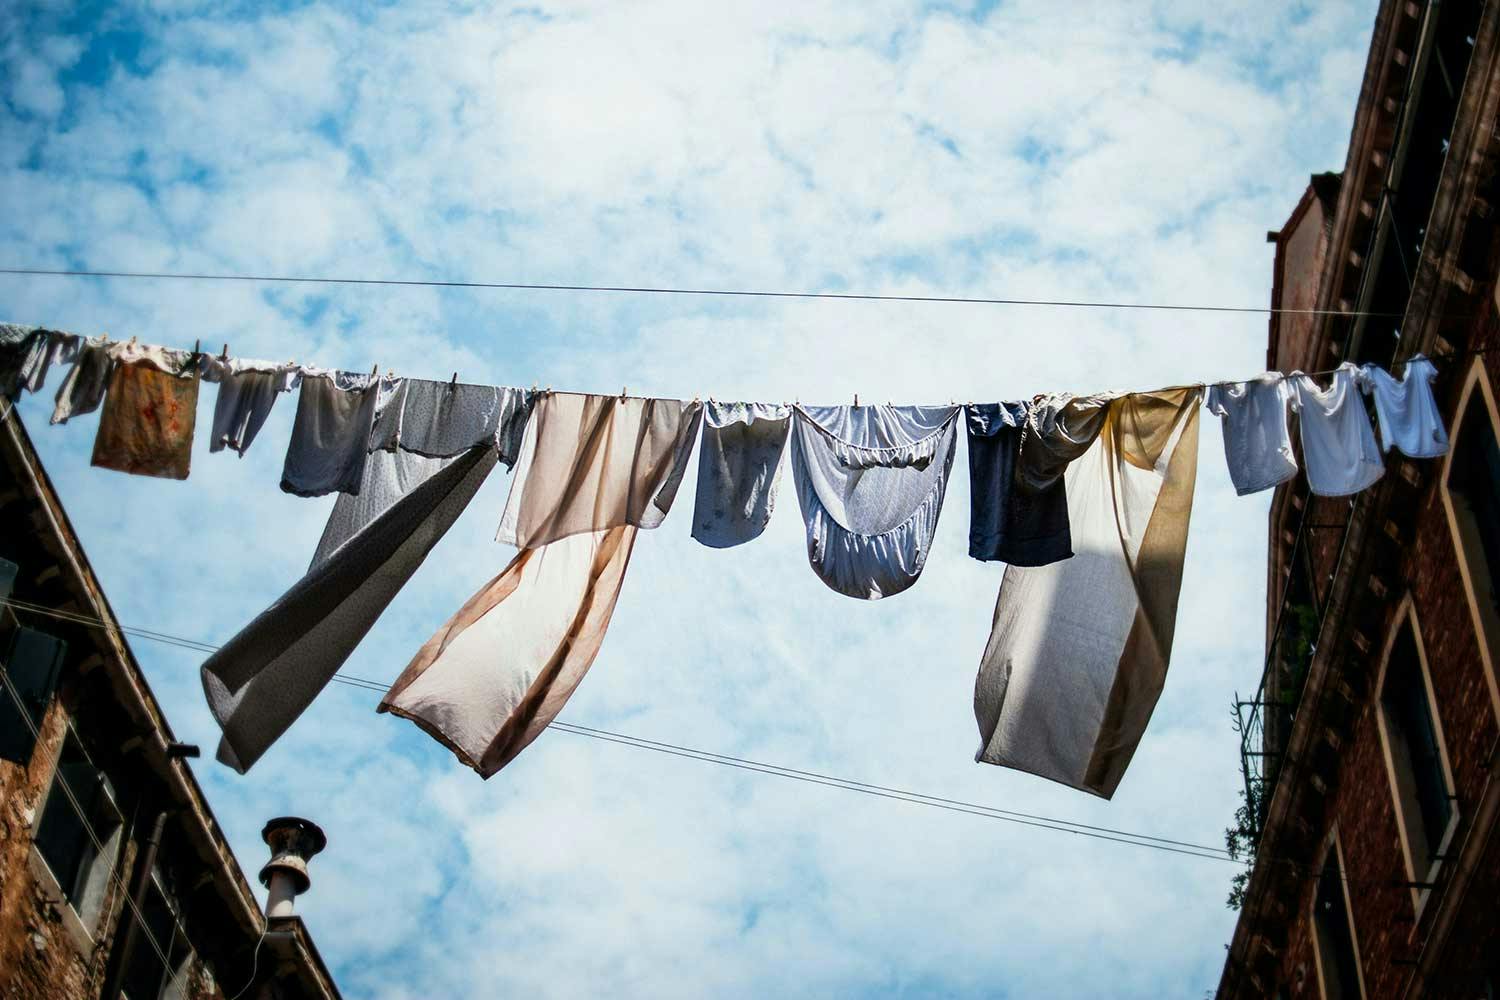 T-shirts and bed linens hang on a line stretched between two old buildings, under a bright blue sky with fluffy clouds.